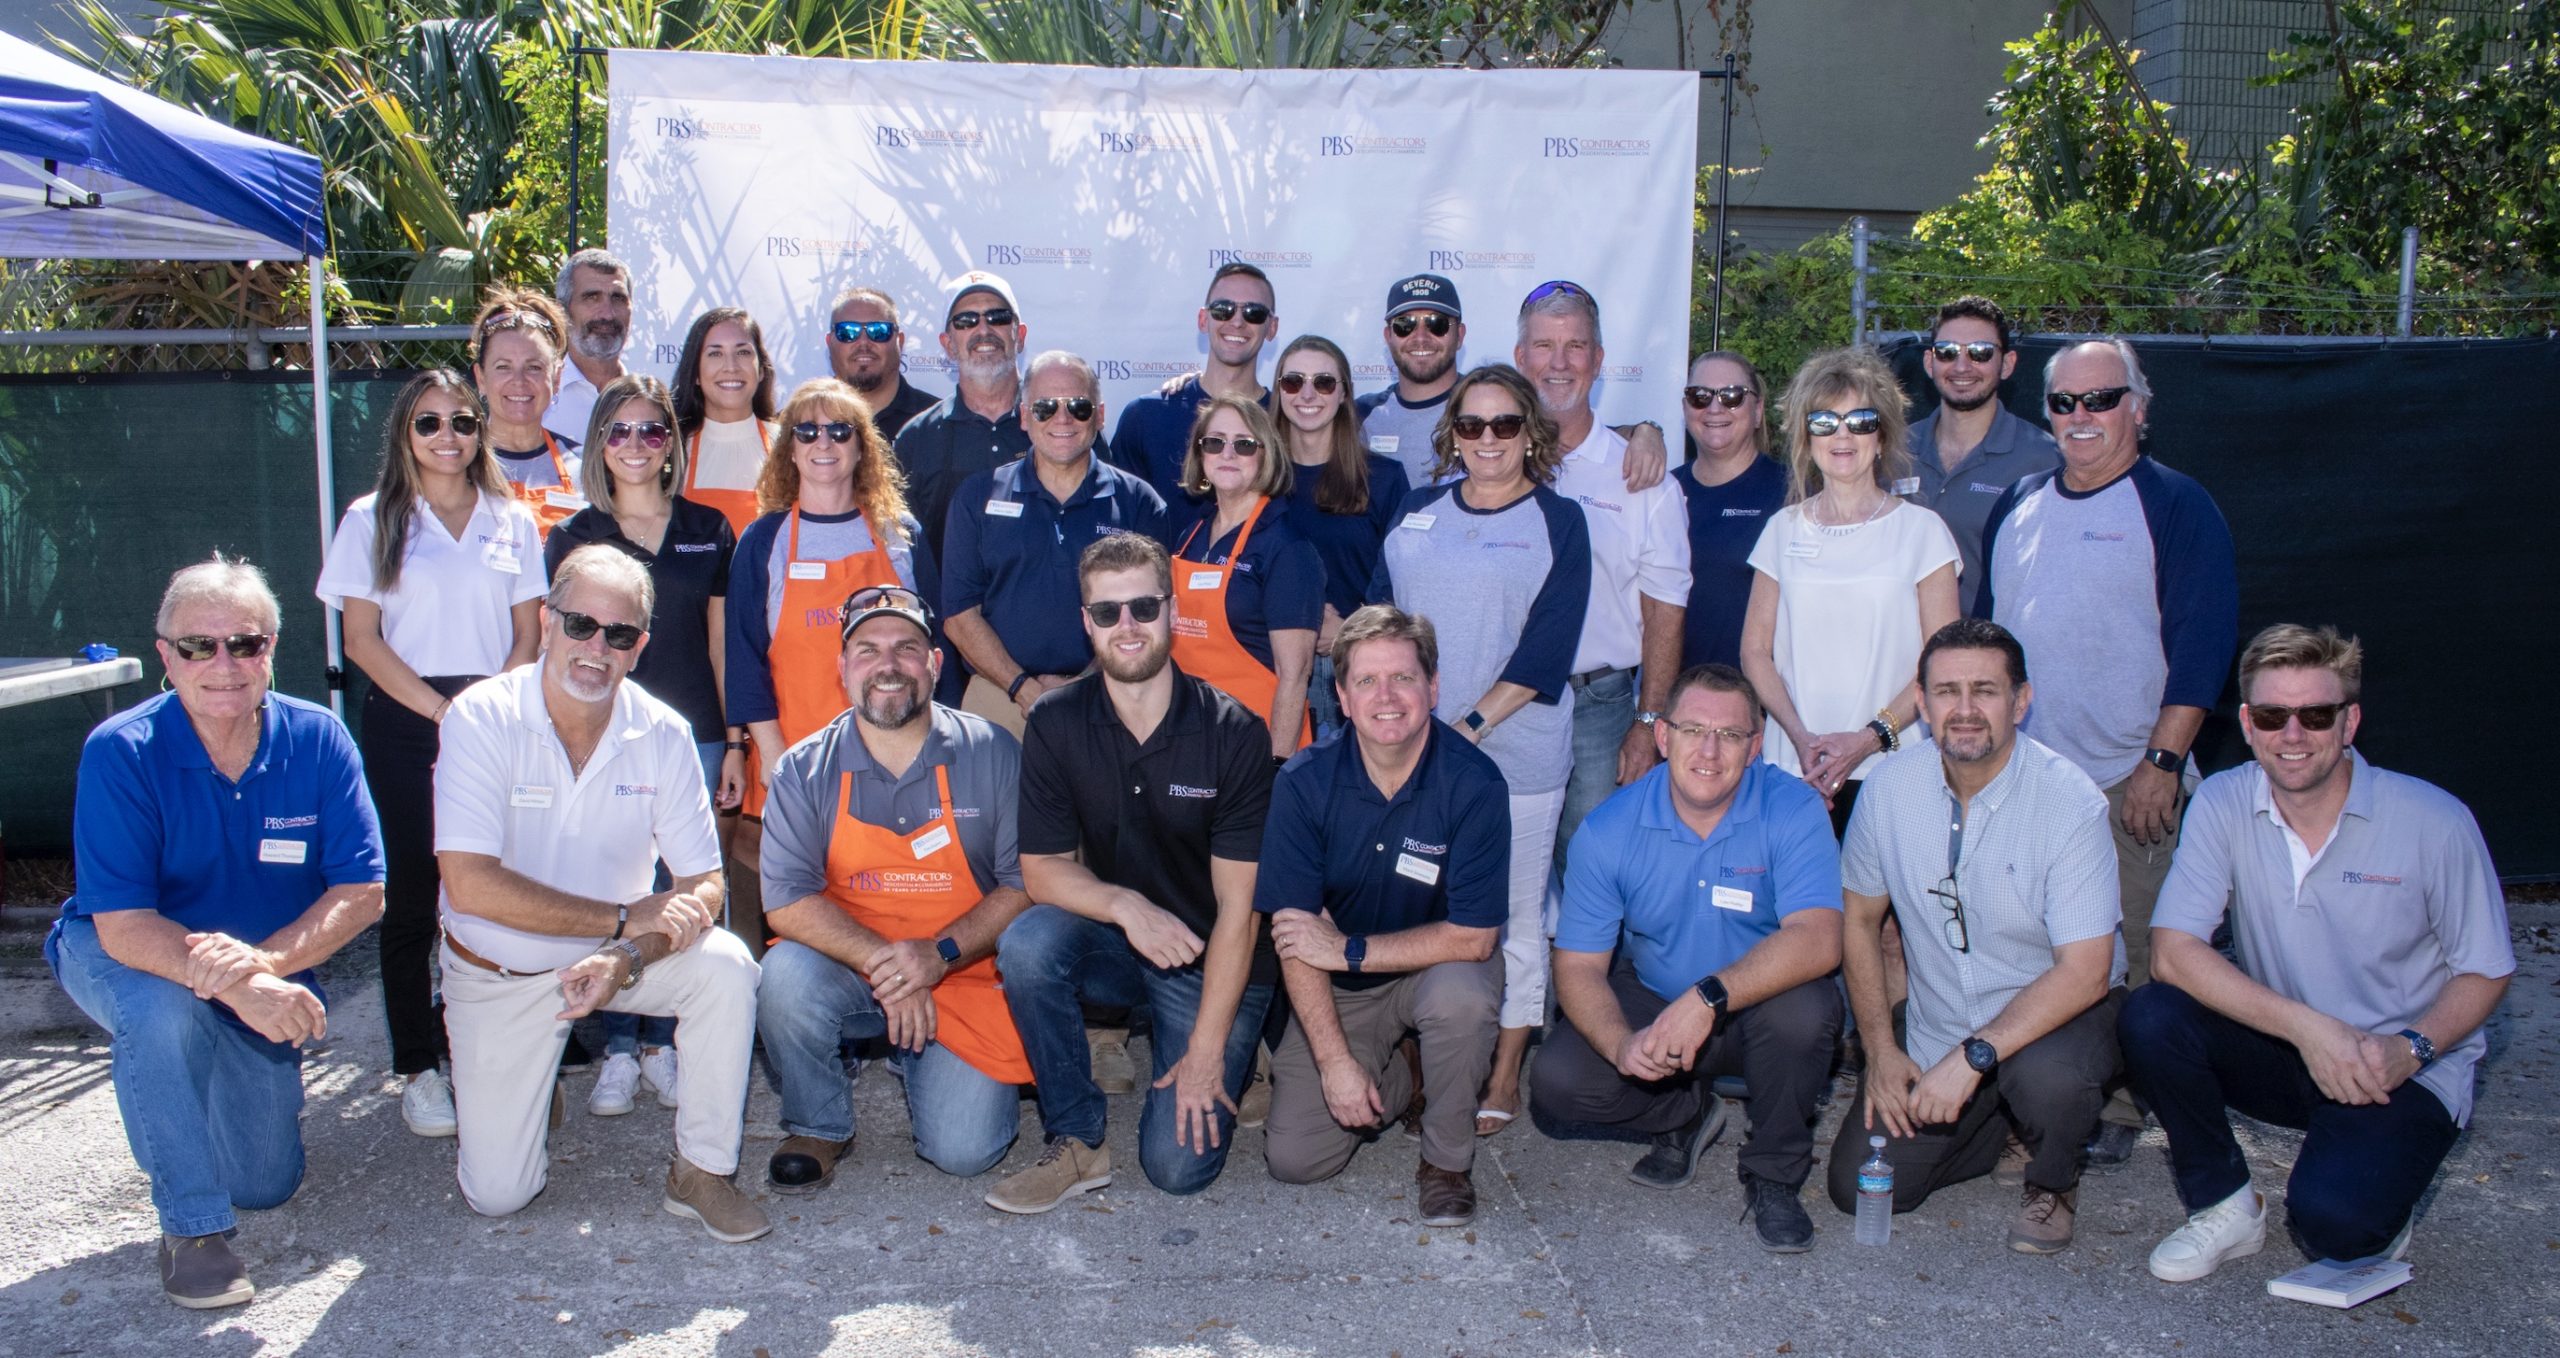 Russell’s Barbecue Raises Over $15,000 for First Responders in Collier County